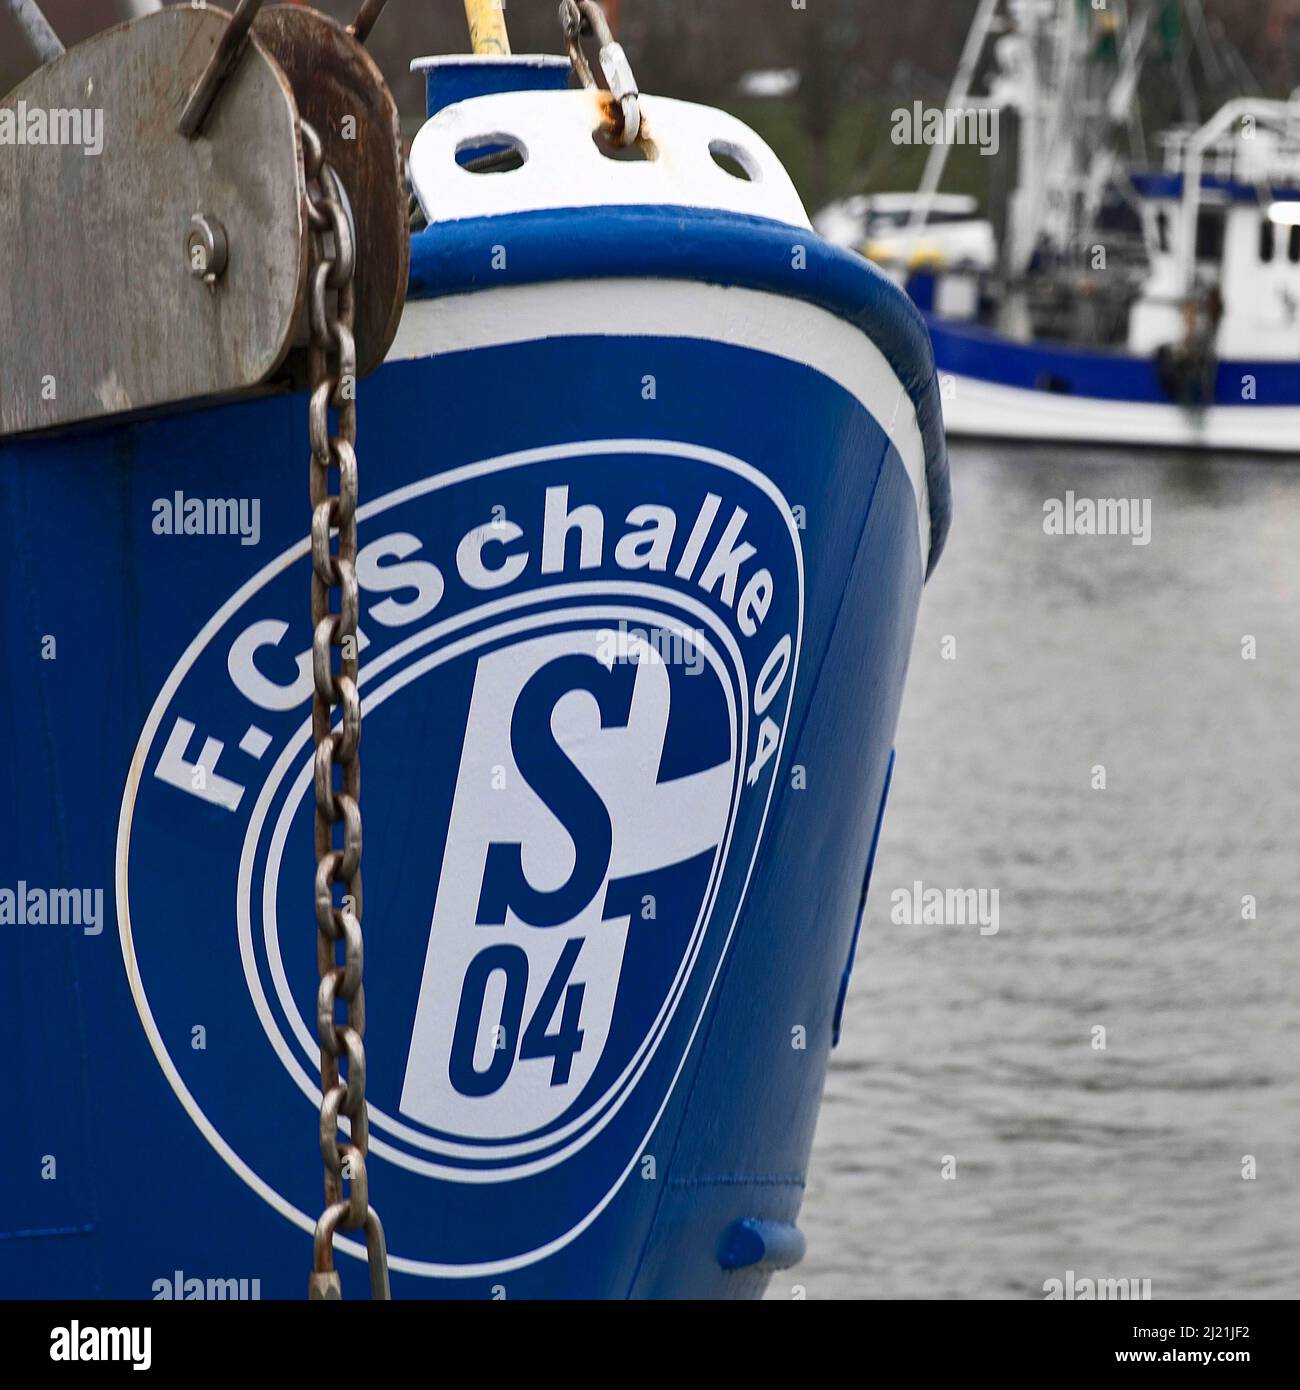 Club emblem of Schalke 04 on the bow of a ship in harbour, Germany, Schleswig-Holstein, Buesum Stock Photo